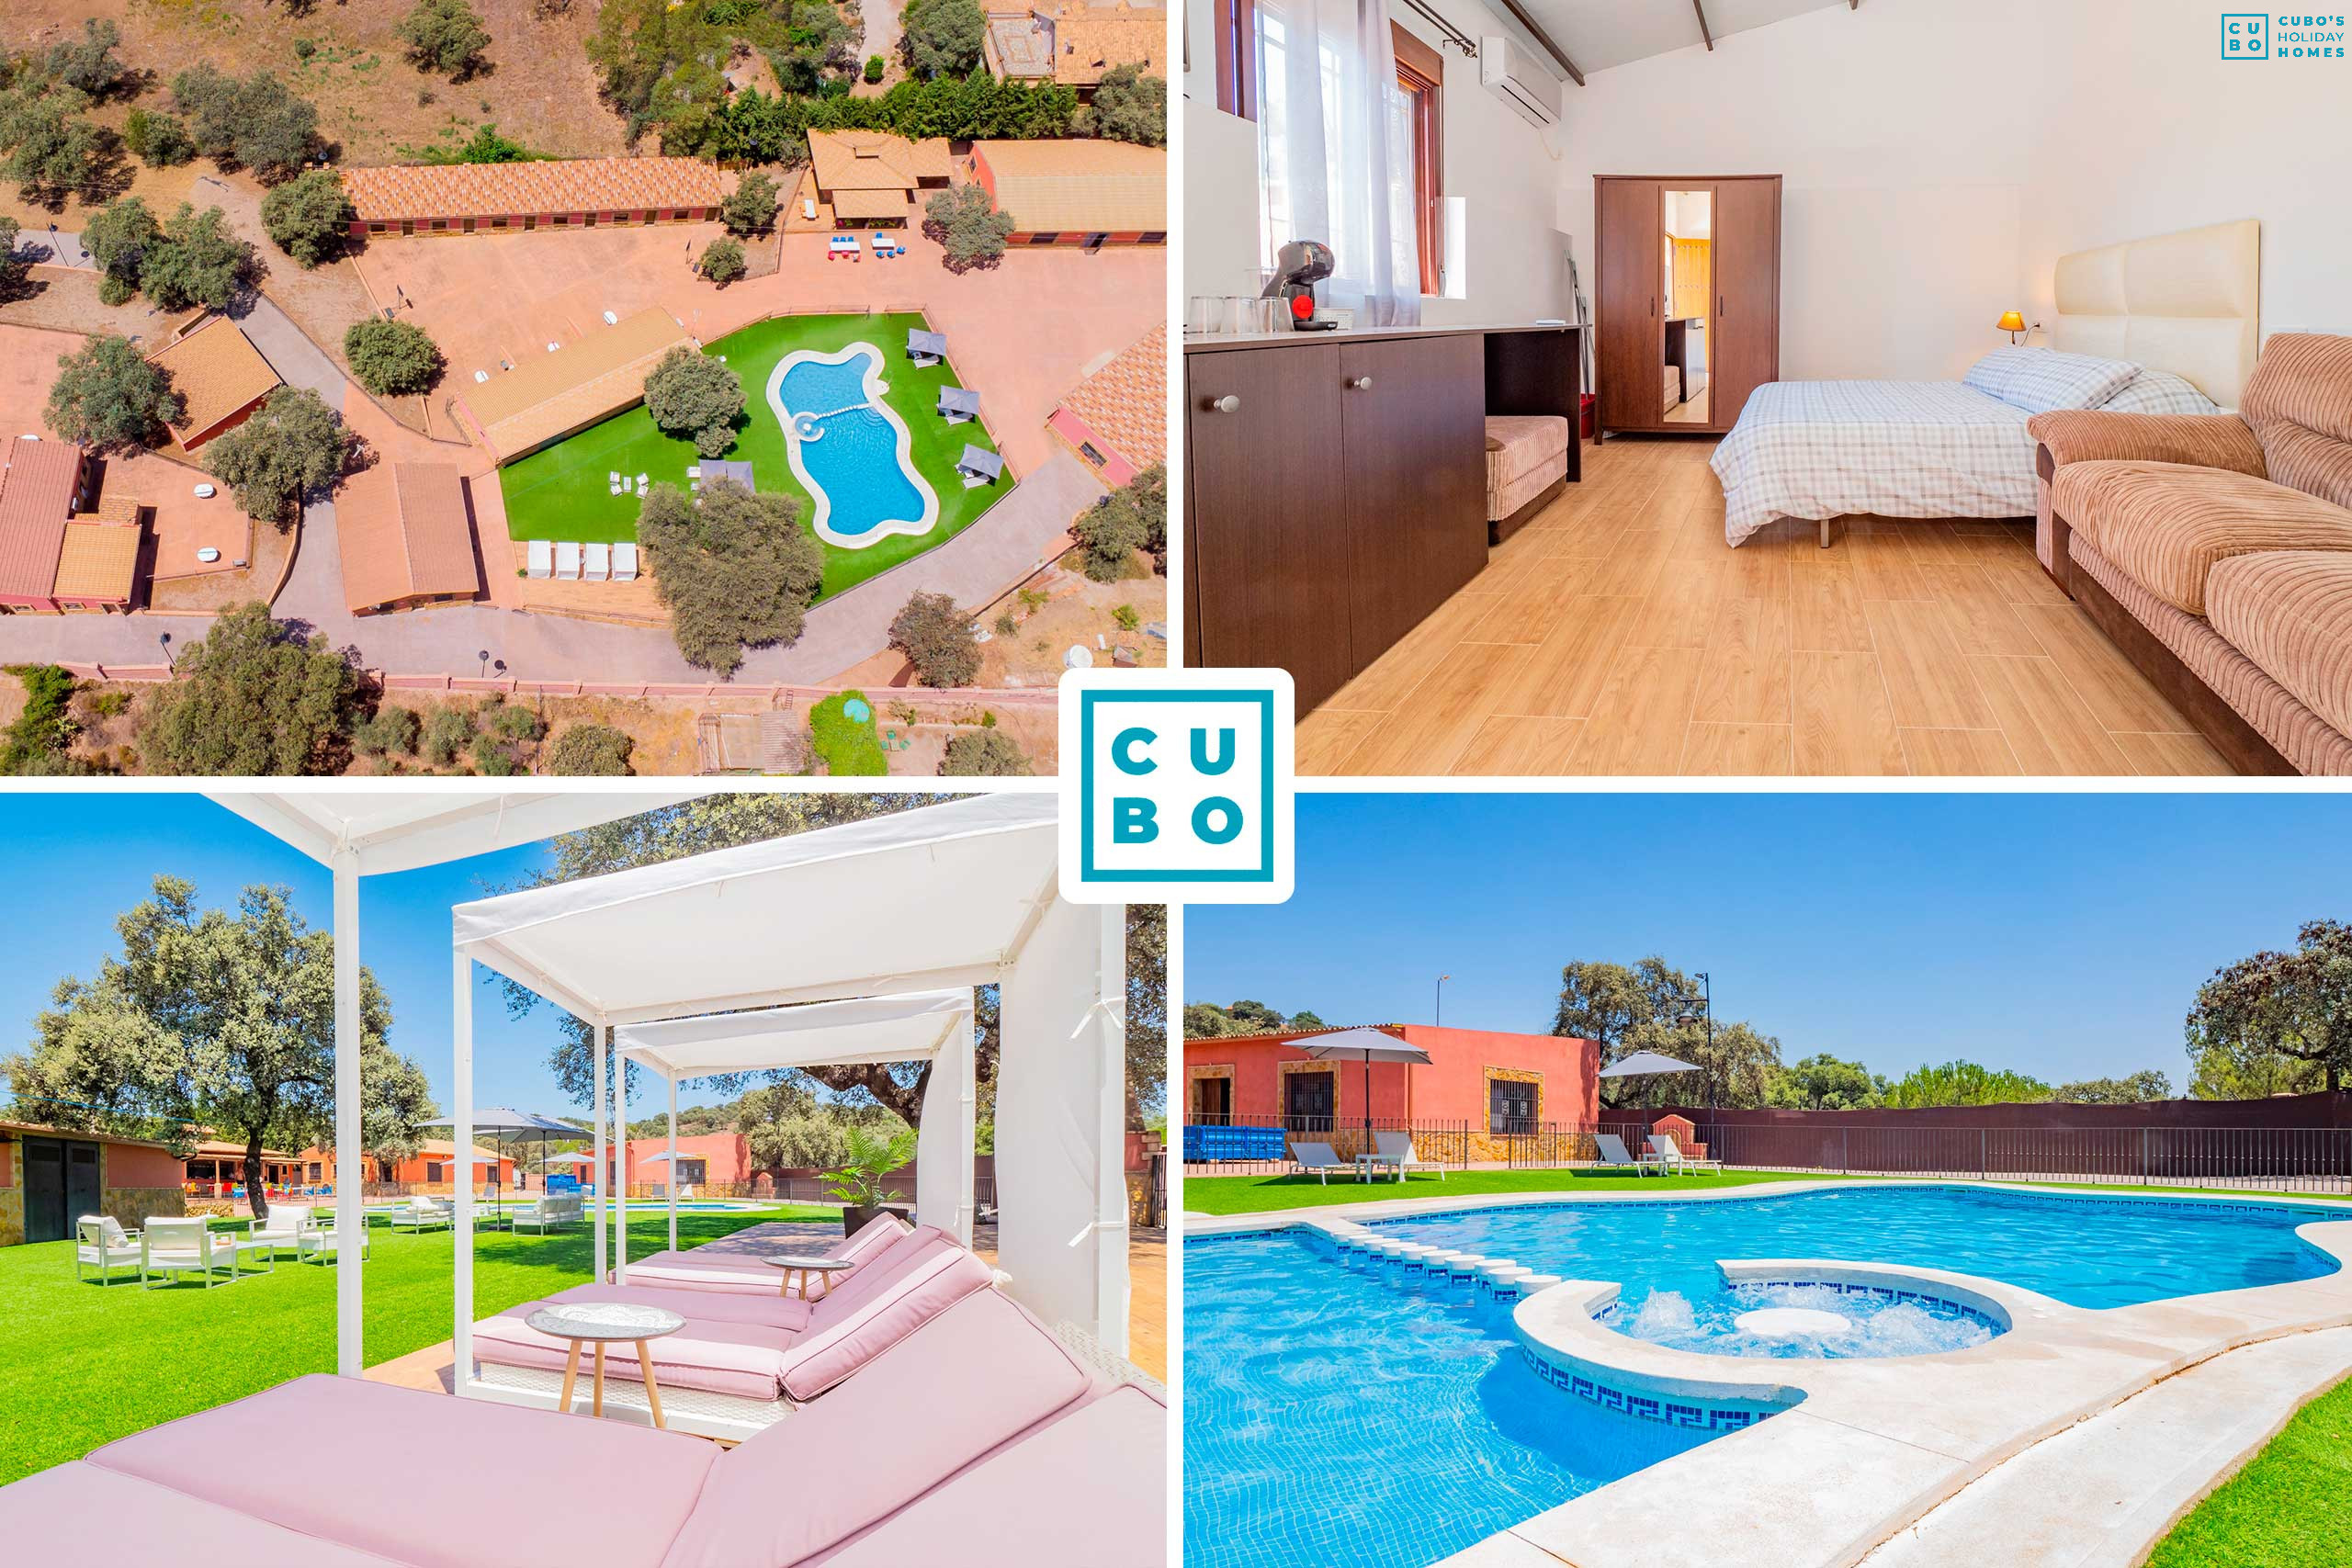 Charming holiday bungalow in Cordoba los Pedroches with swimming pool and chill out area for 12 people.